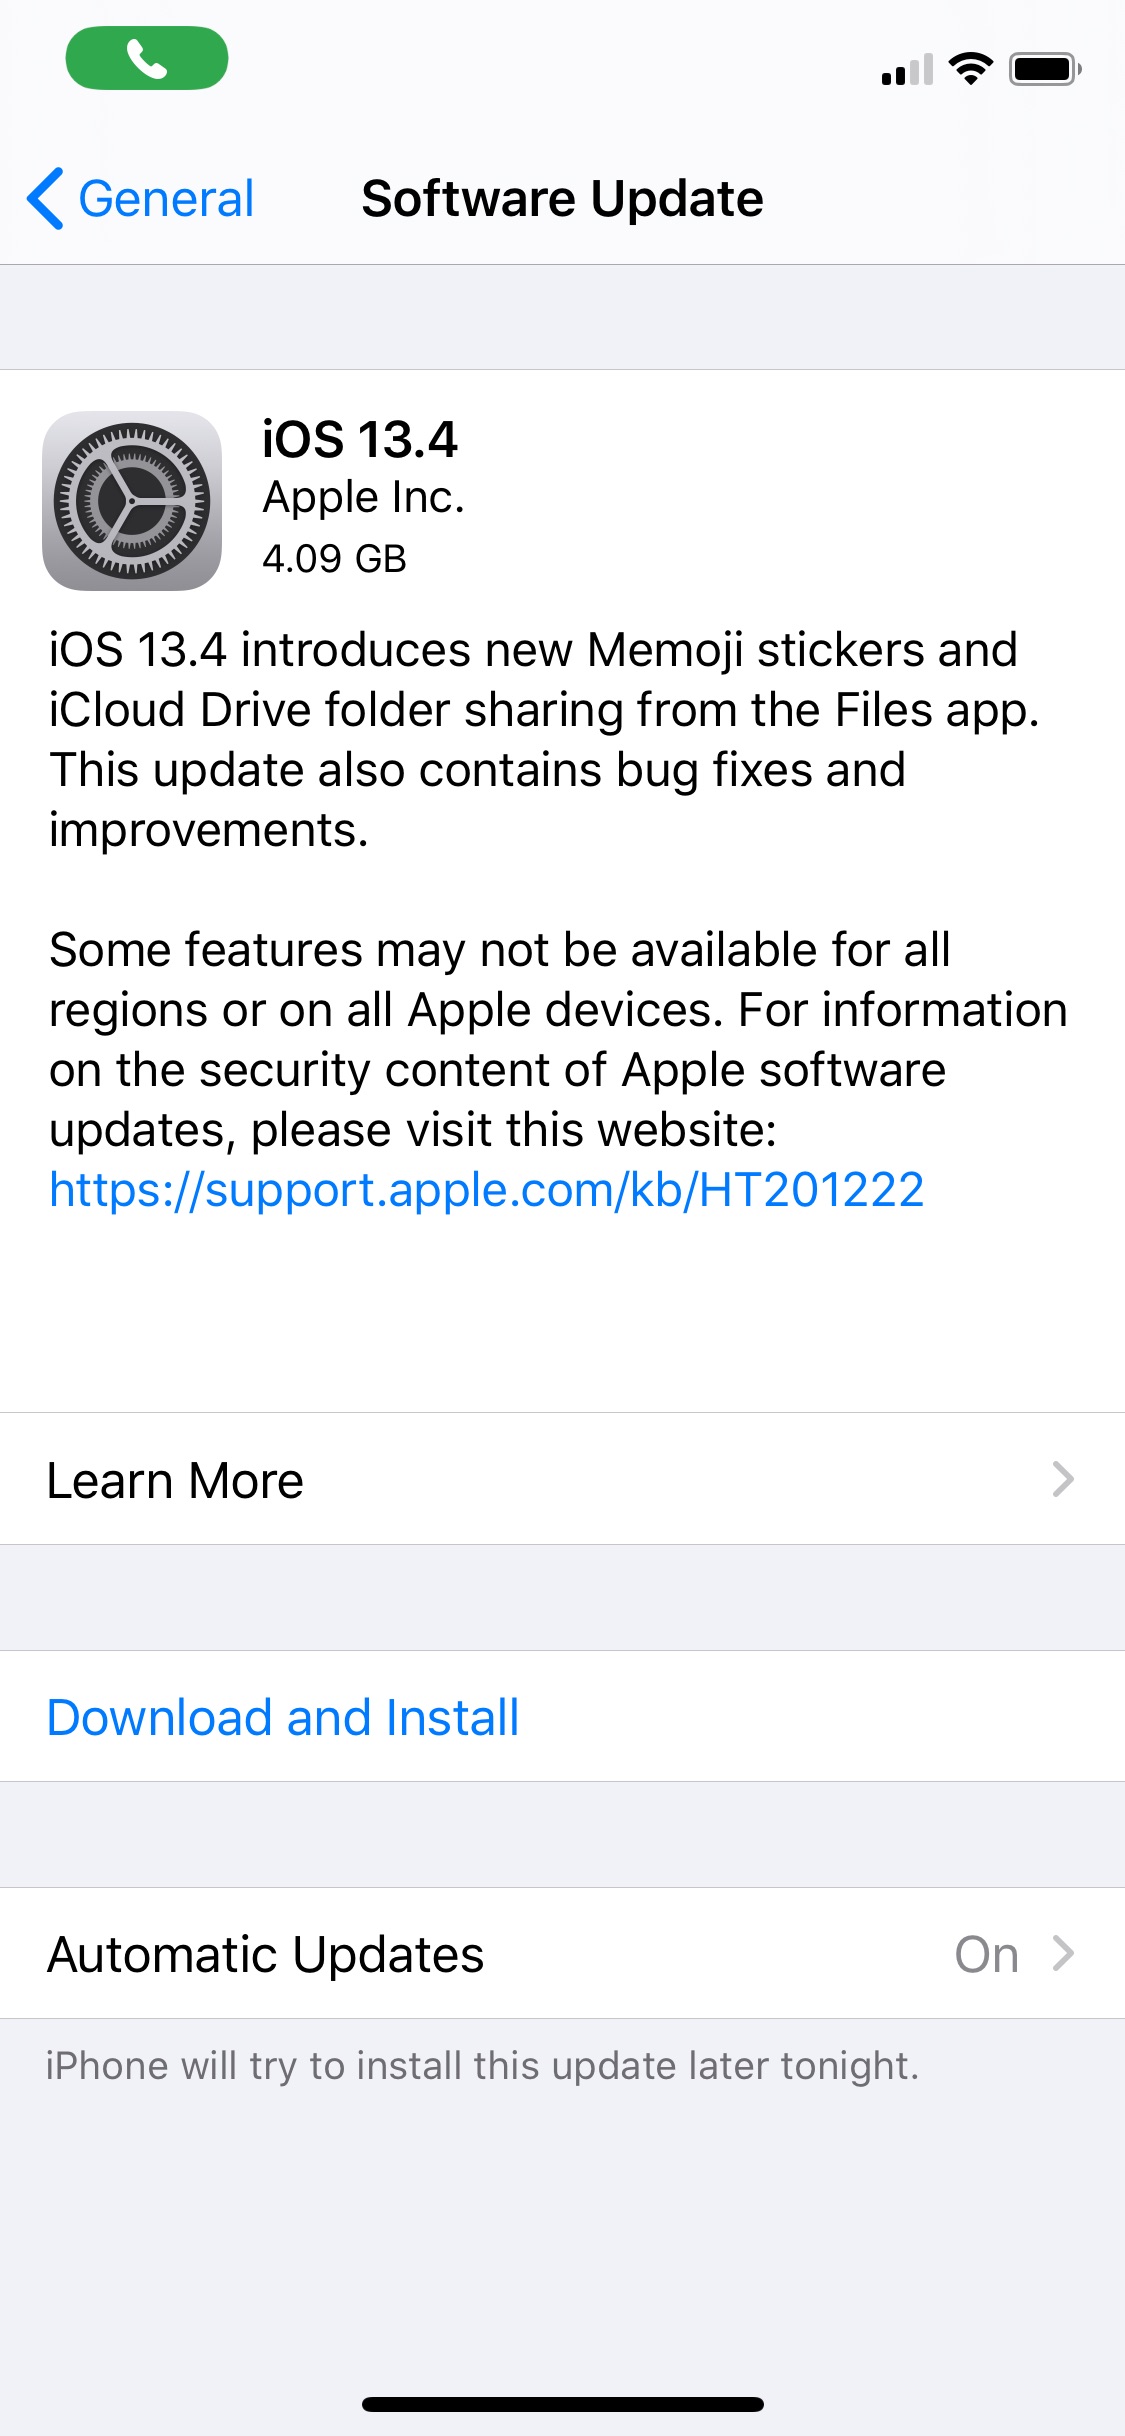 Apple Releases iOS 13.4 and iPadOS 13.4 GM Seed to Developers [Download]